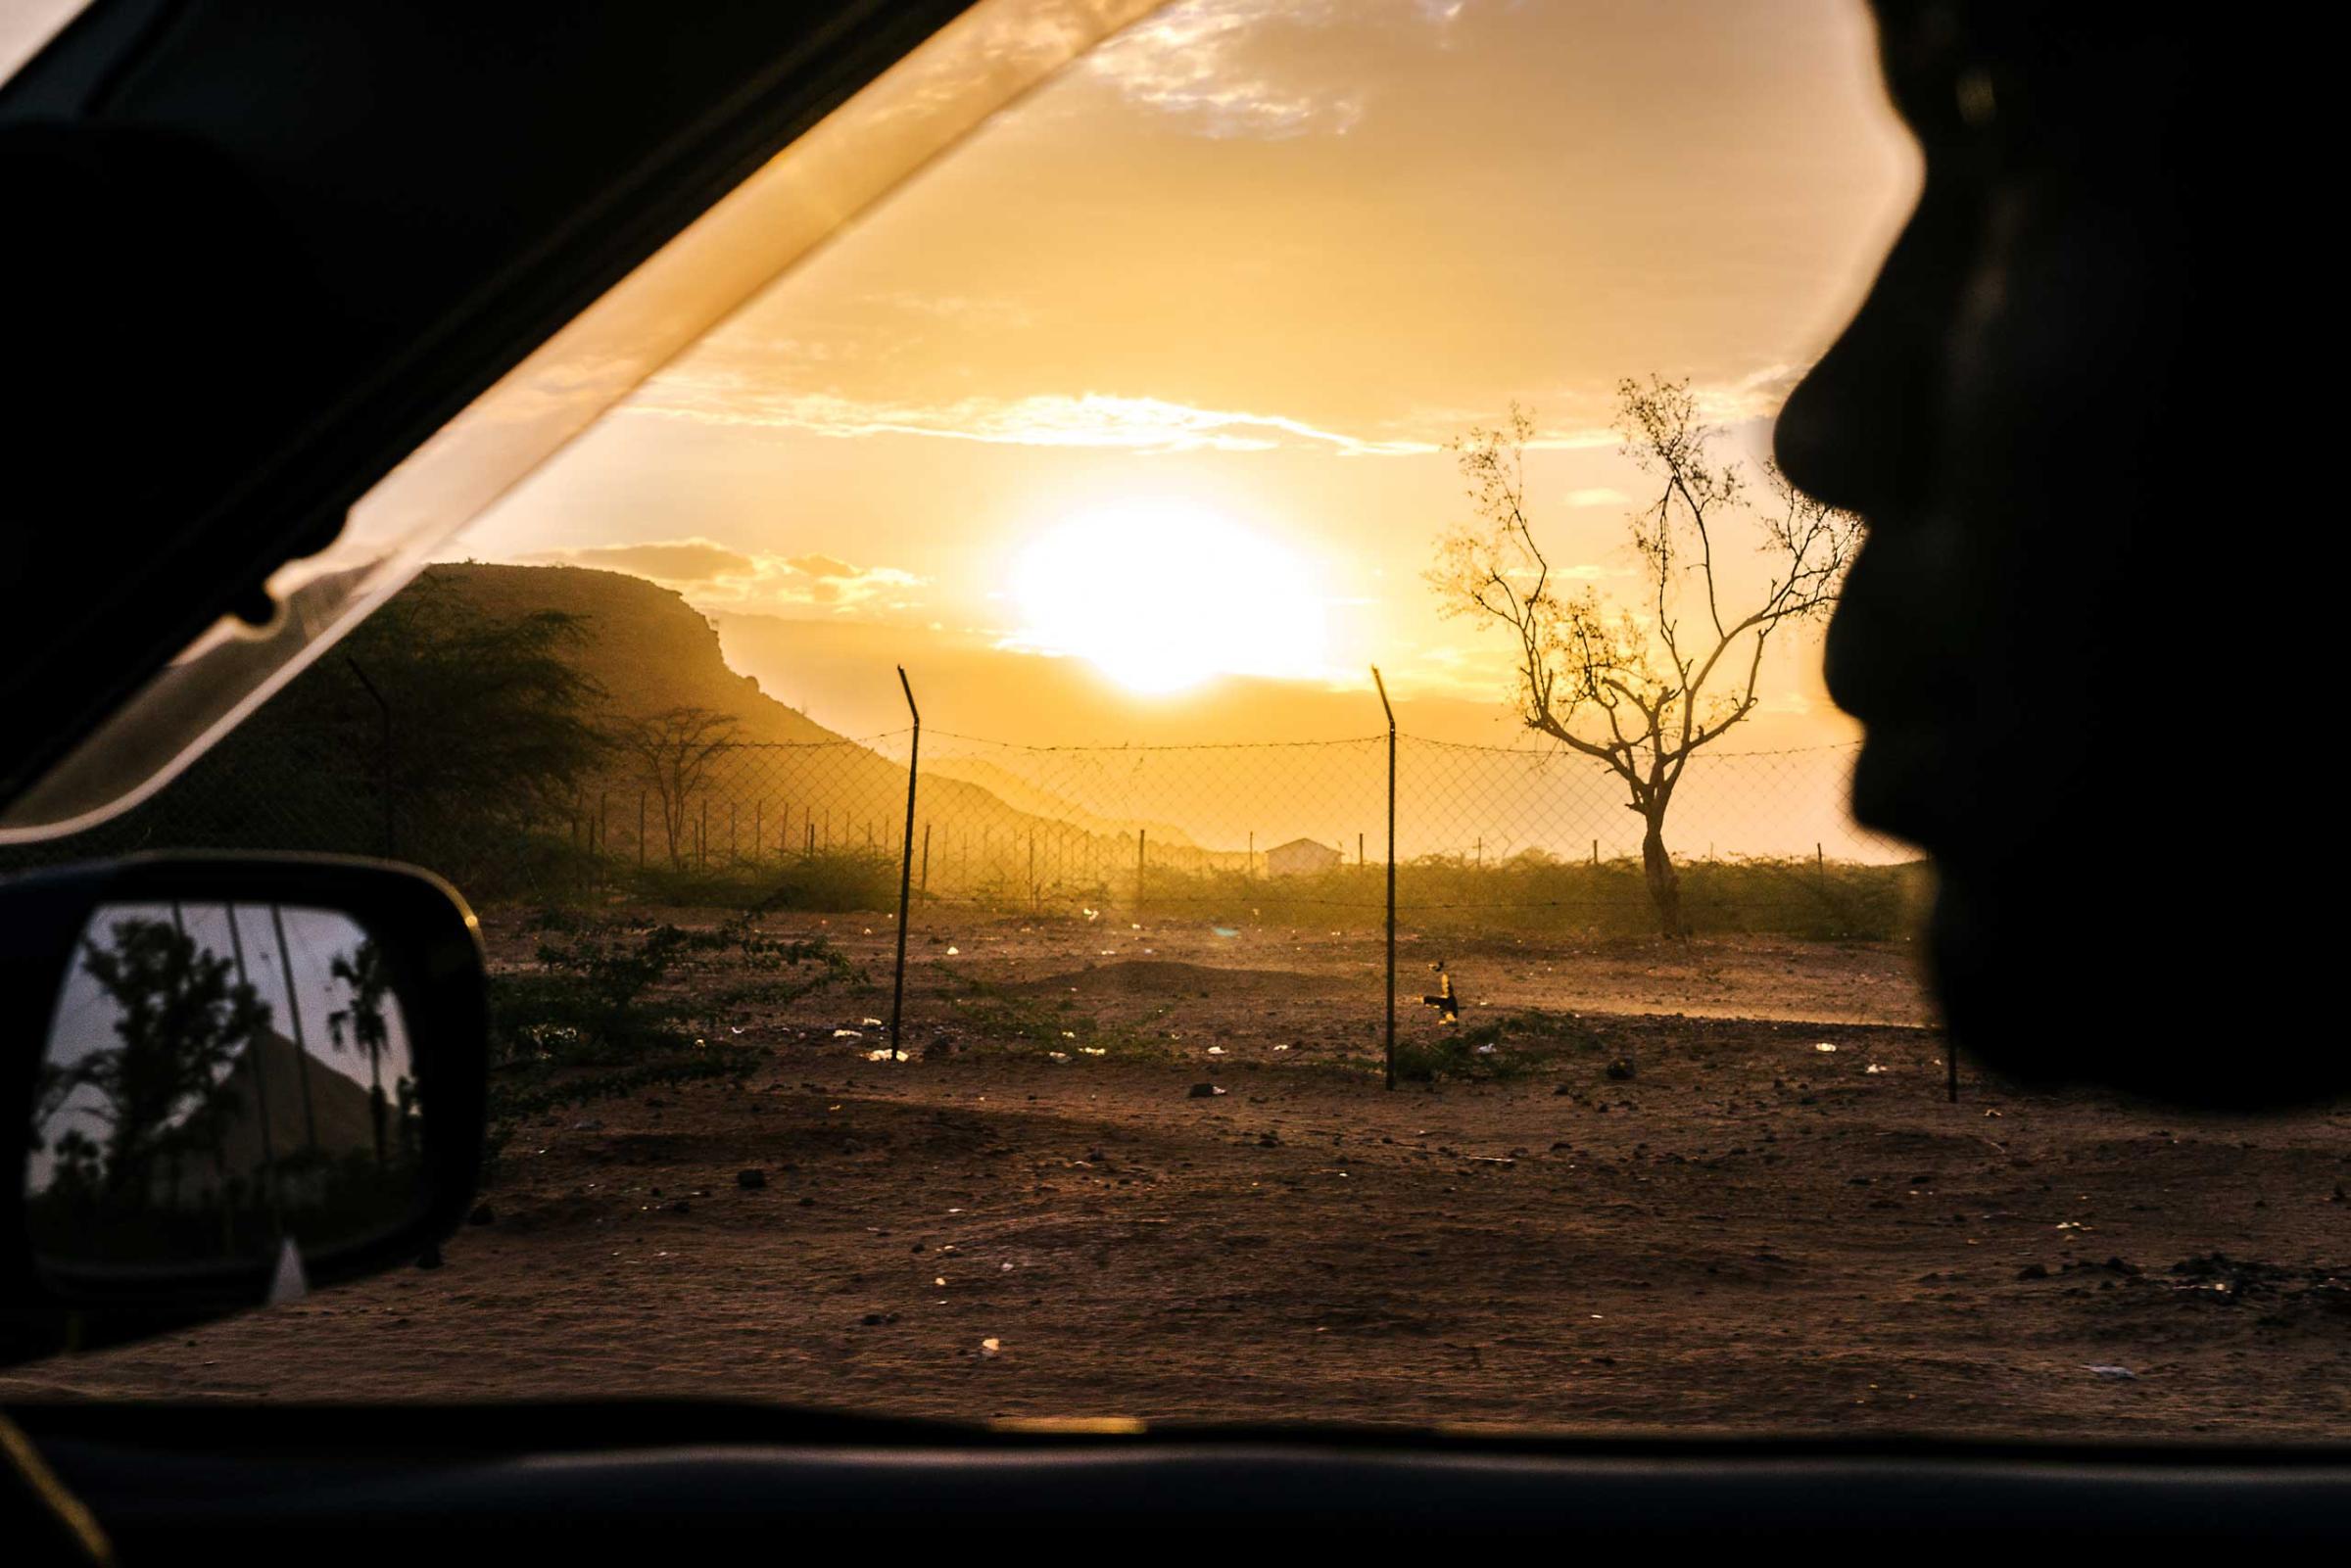 The sun sets over Lodwar in northwestern Kenya near where the Kakuma Refugee Camp is located. Kakuma is home to 182,000 refugees from all over the region, including many homophobic countries. Around 100 LGBT refugees from Uganda also call it home.